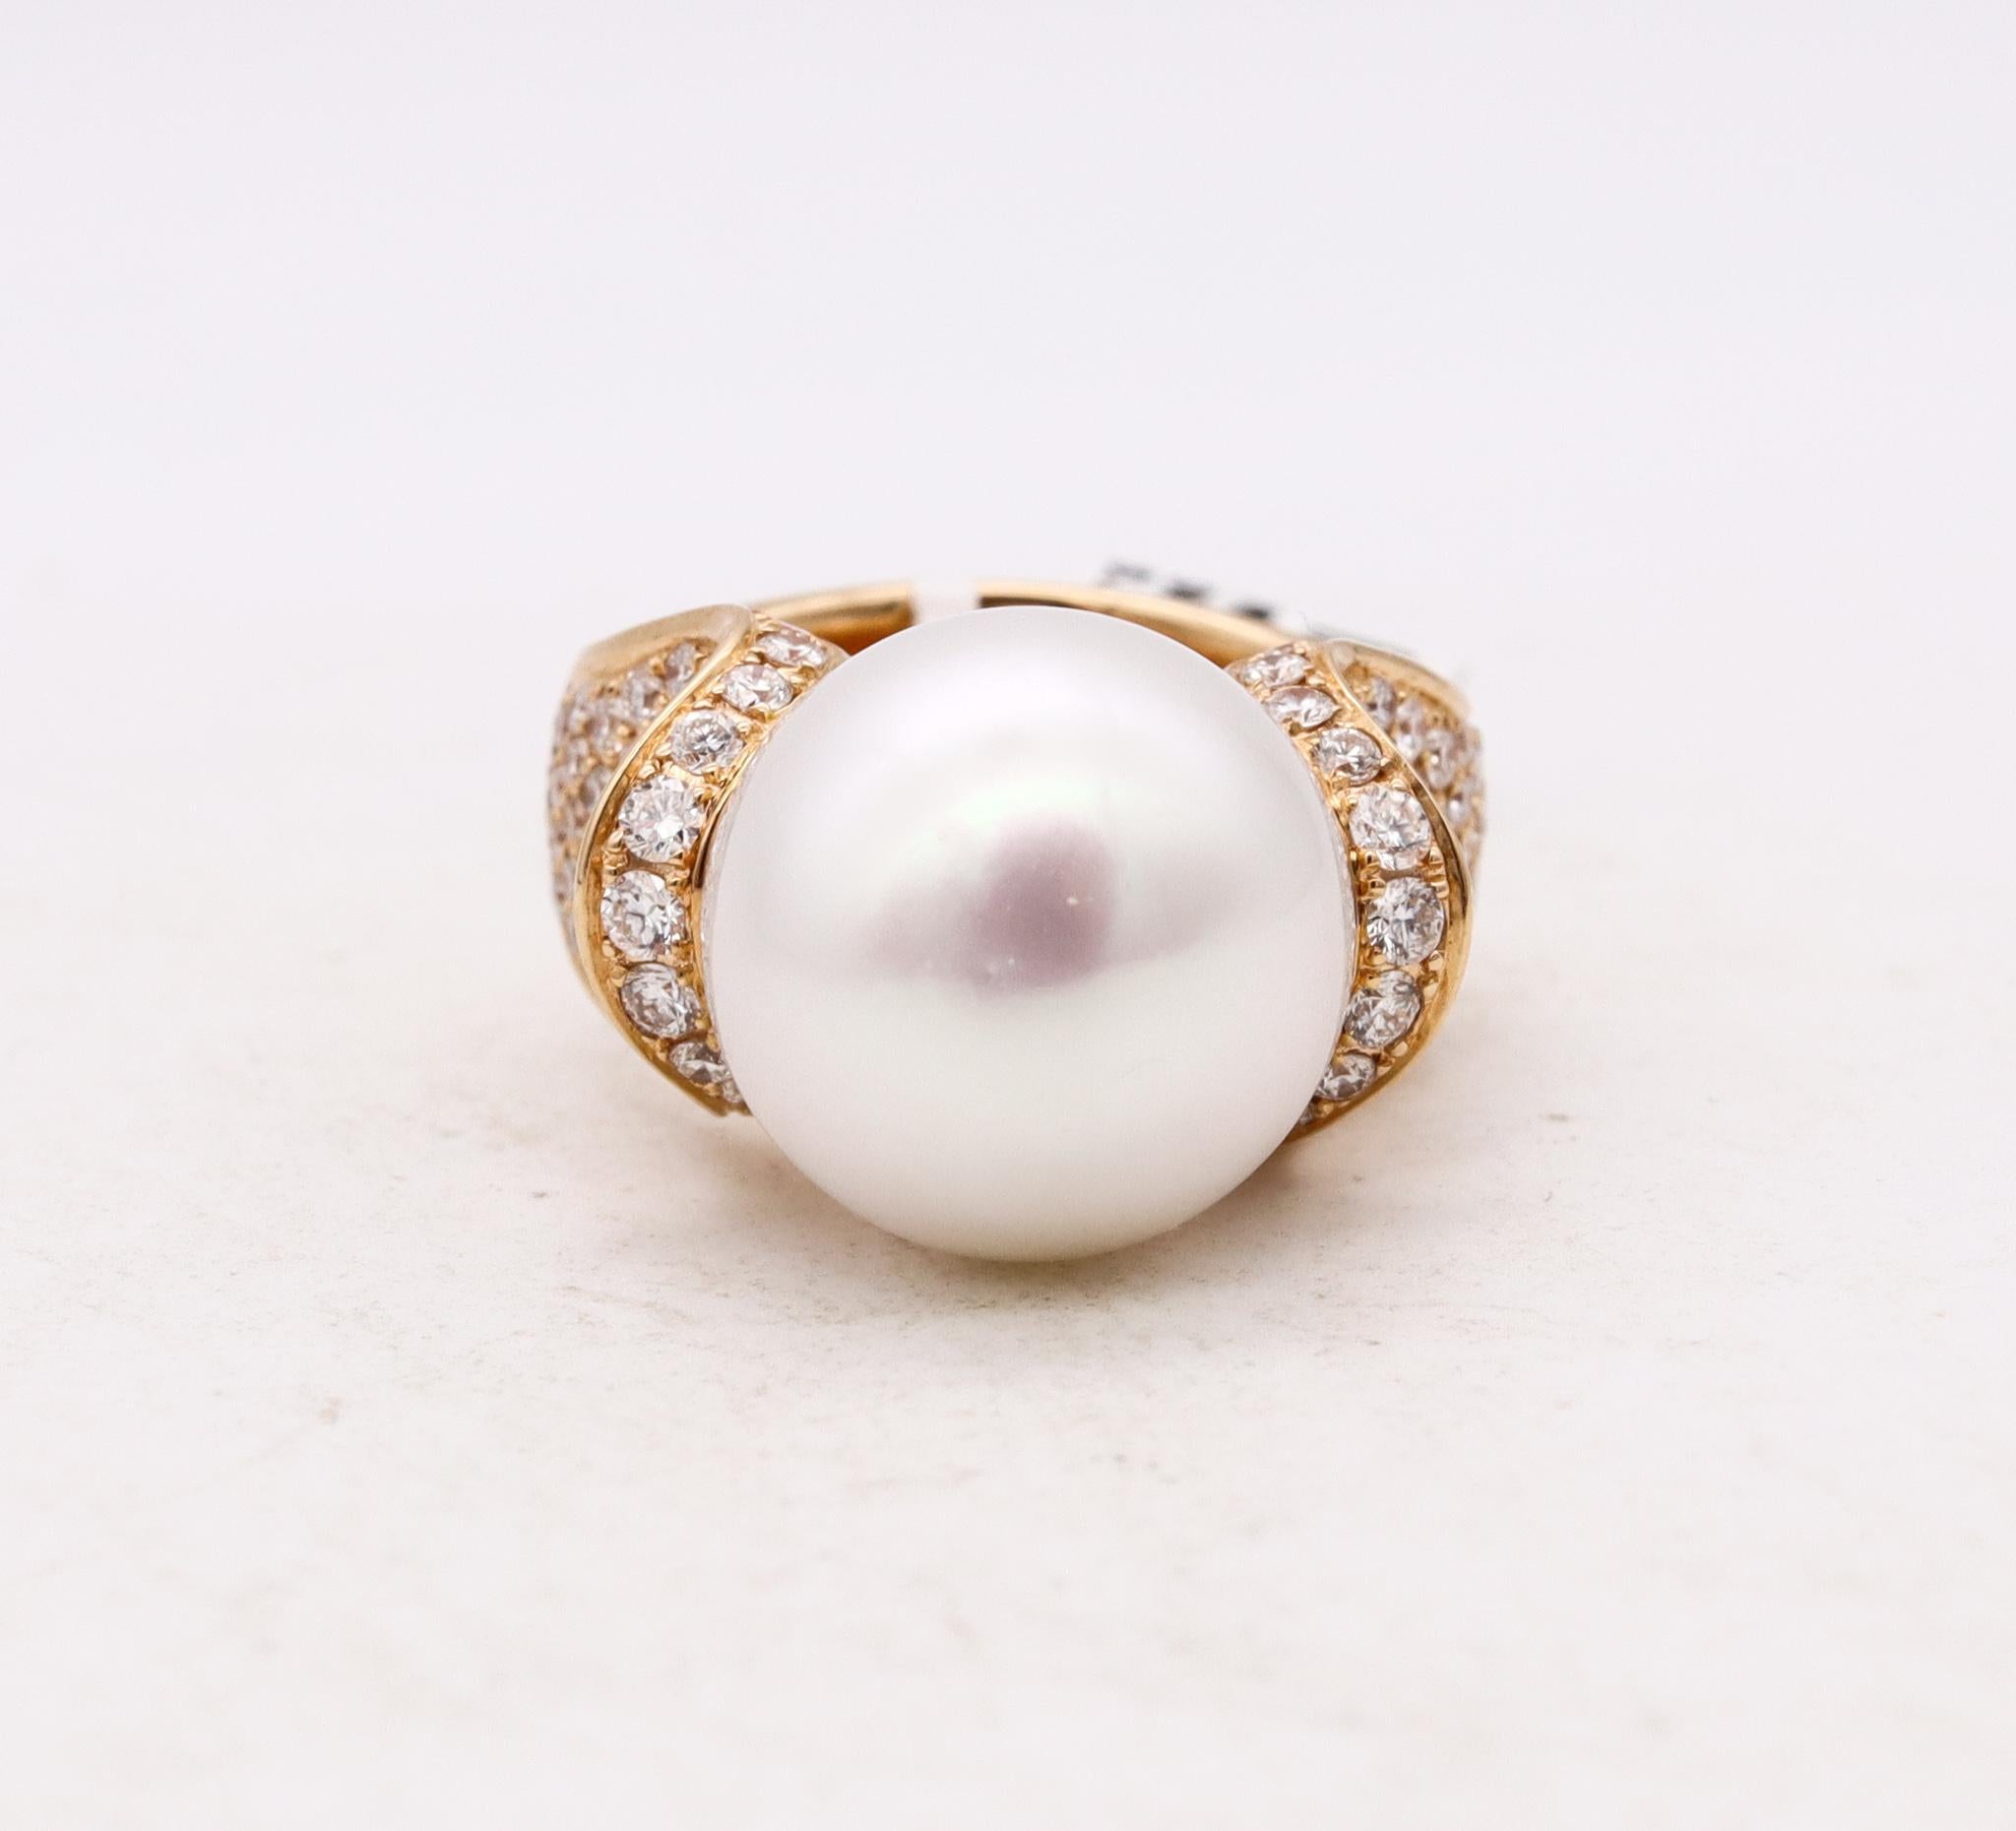 Hans D Krieger Ring 18kt Gold with 1.67 Cts Diamonds and White Pearl 2